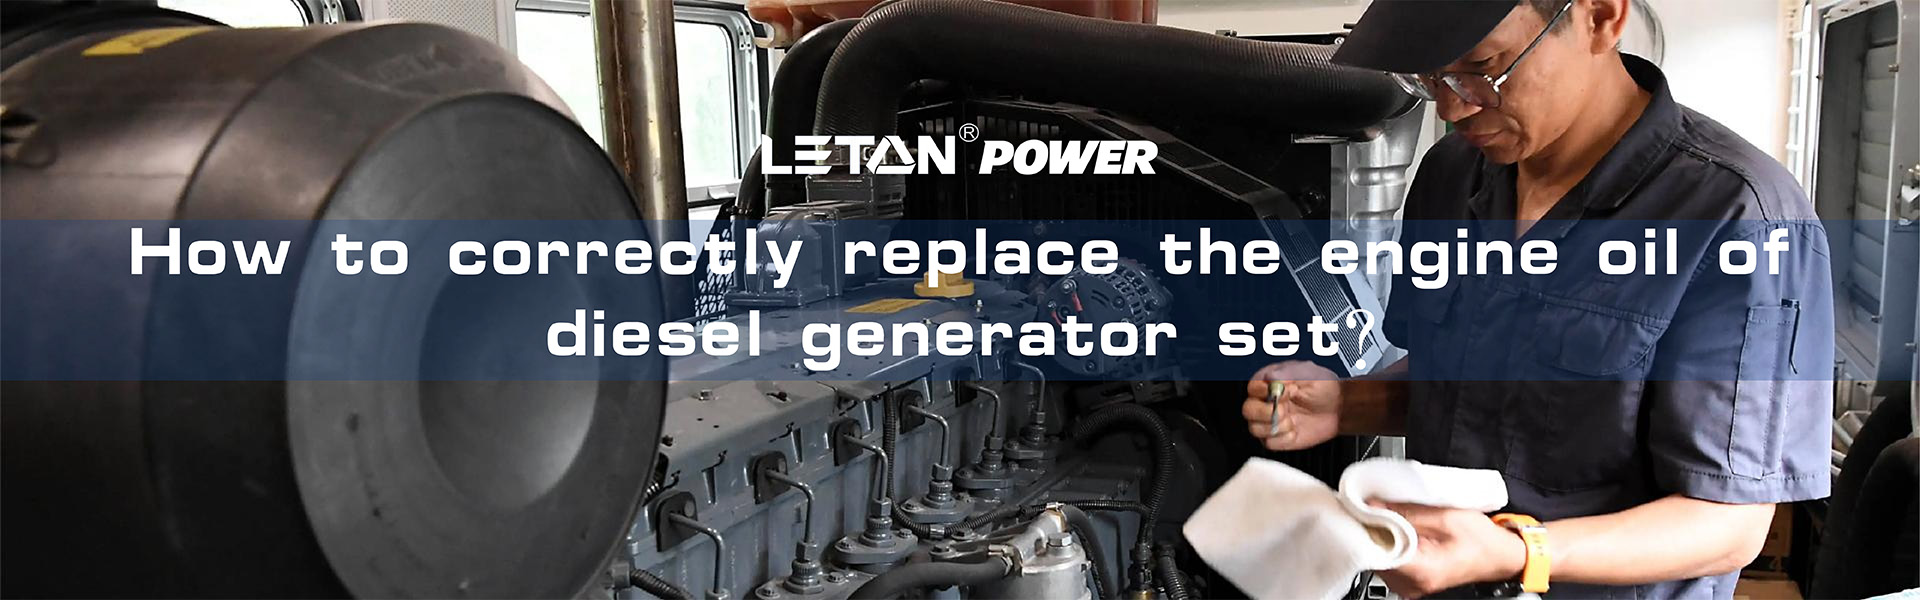 How to correctly replace the engine oil of diesel generator set?